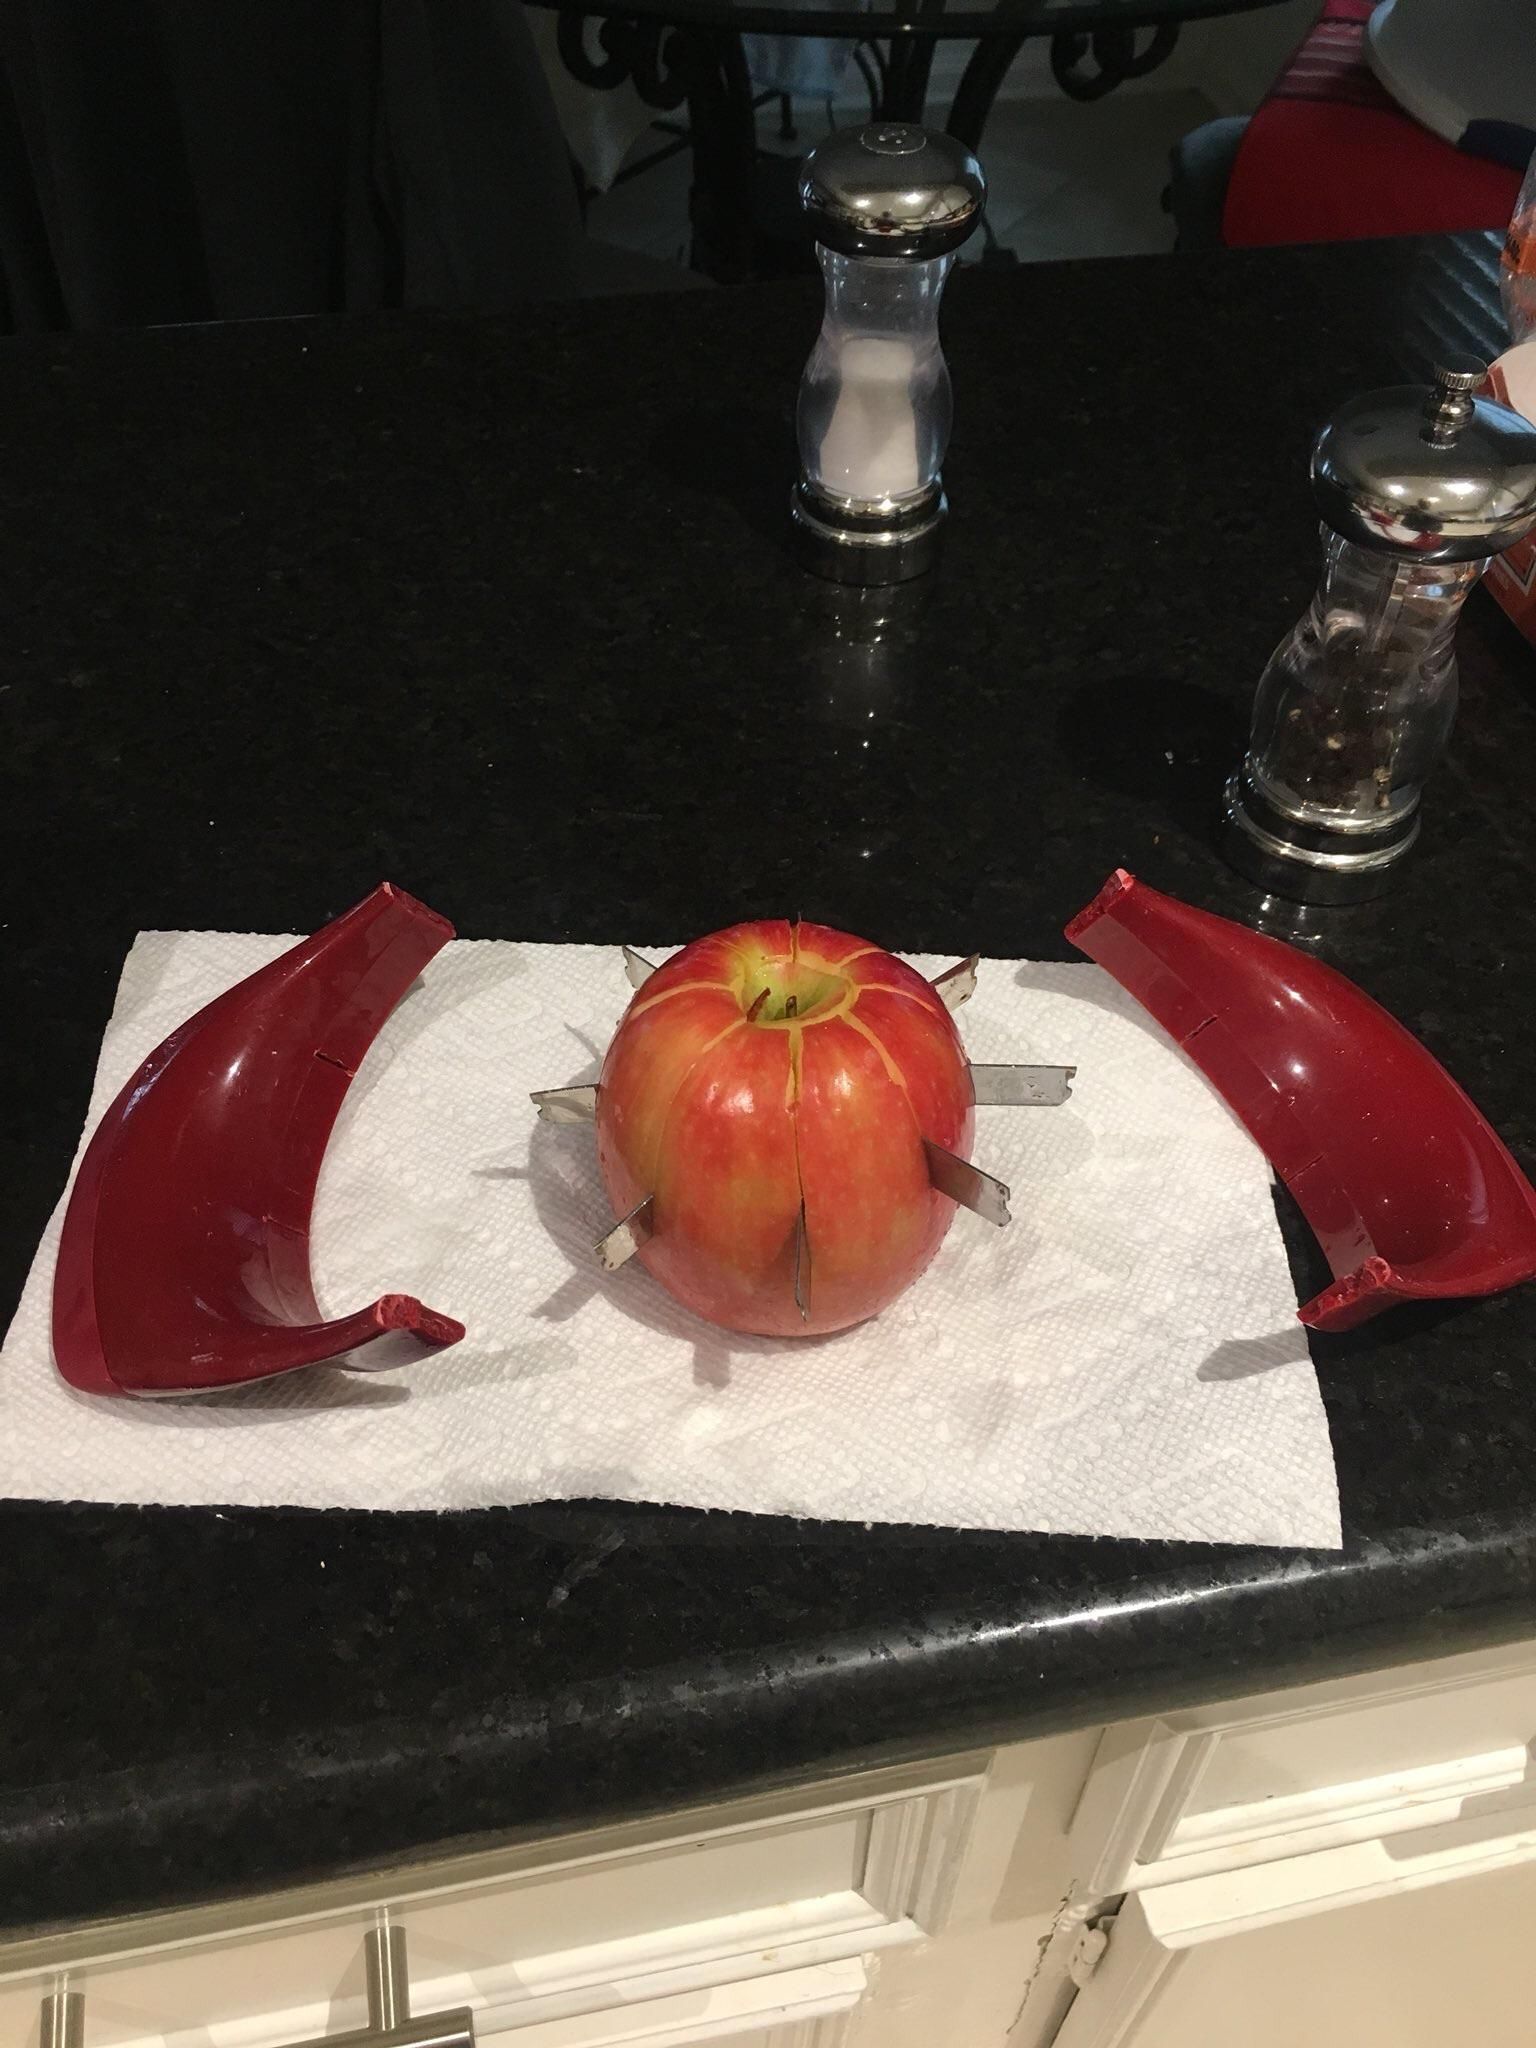 My apple broke the apple cutter and now I have a weapon.